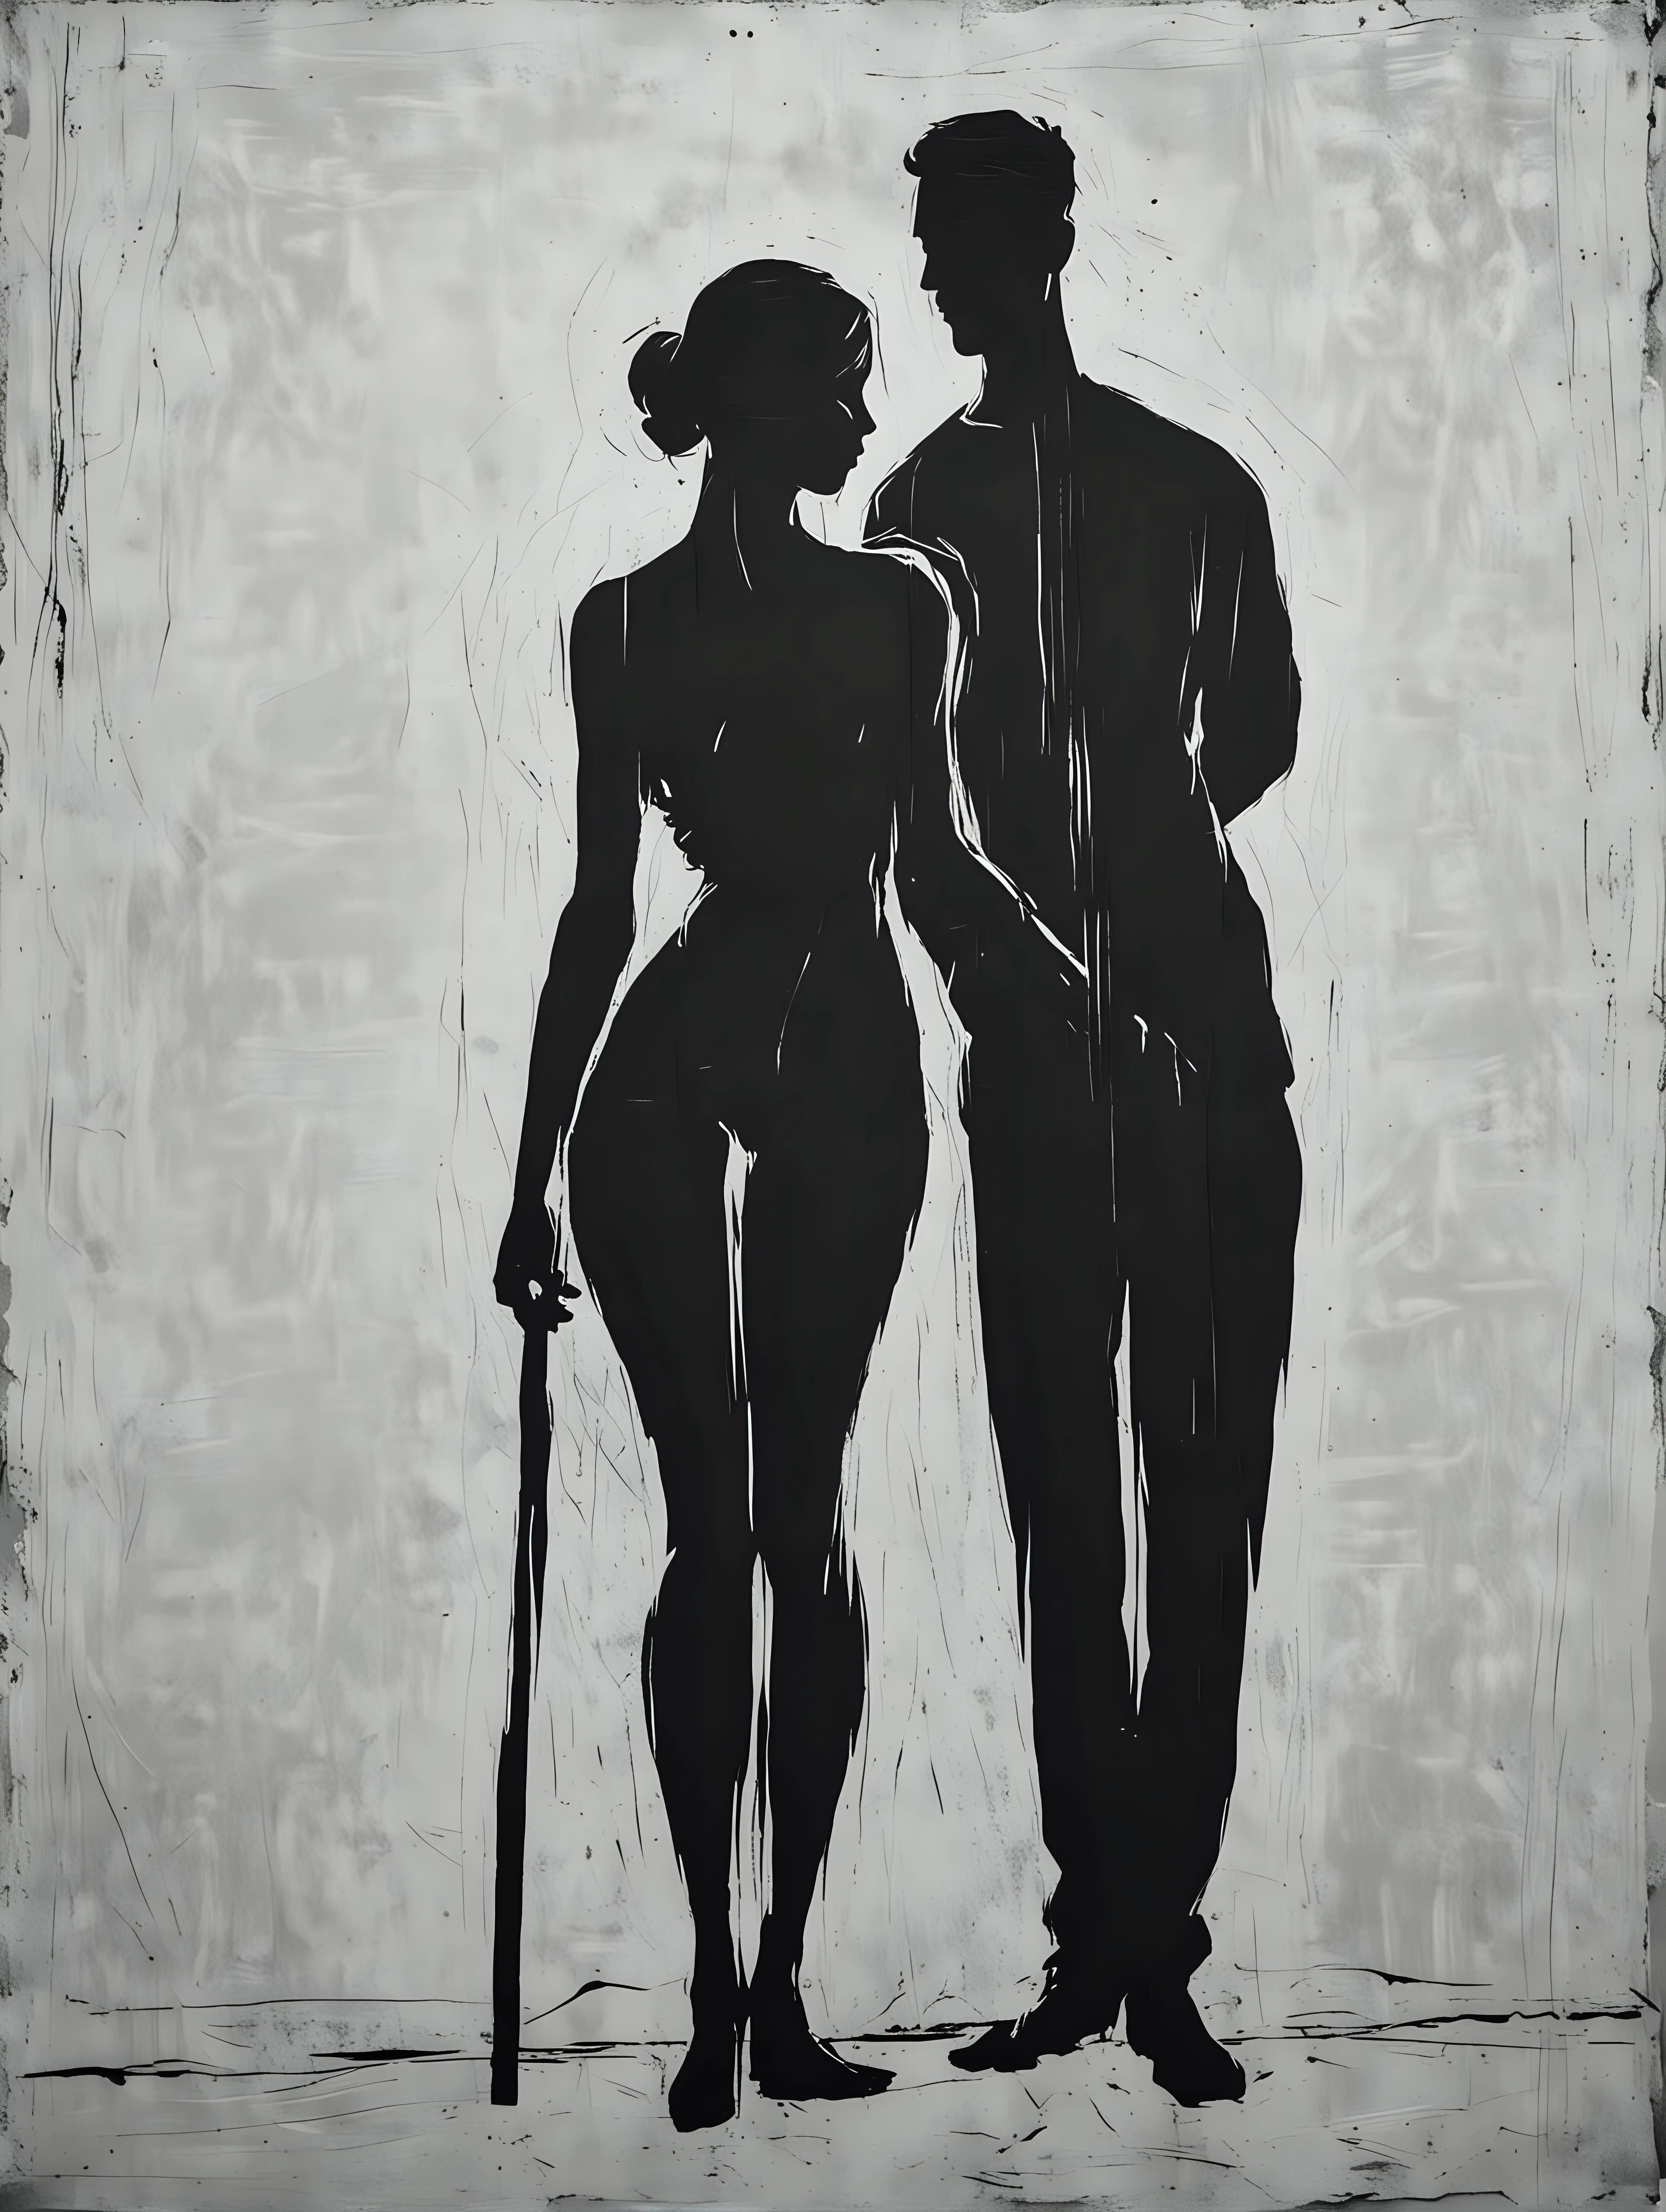 A minimalistic in black and white Poor print quality in the lines of a silhouette of a woman and a man with head bowed down in Matisse style